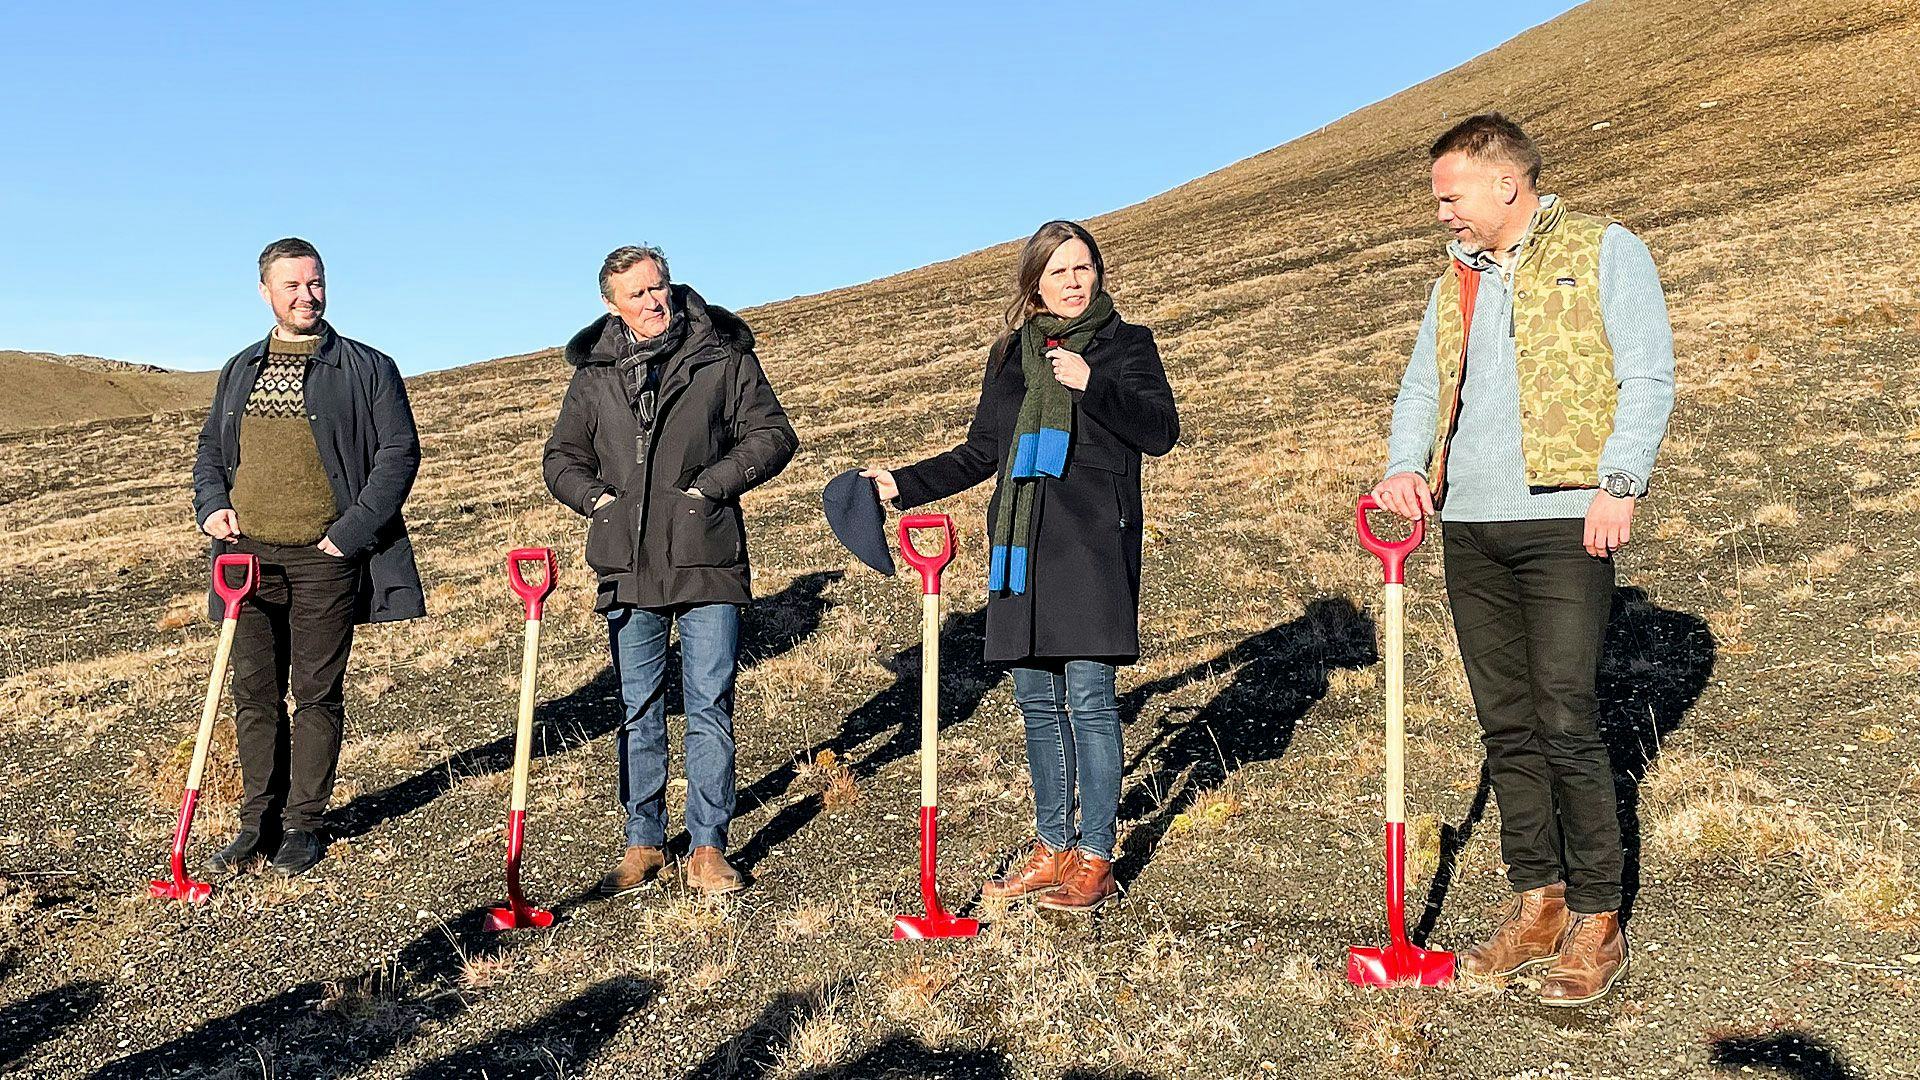 Four individuals dressed in warm clothing, standing outdoors with shovels in their hands